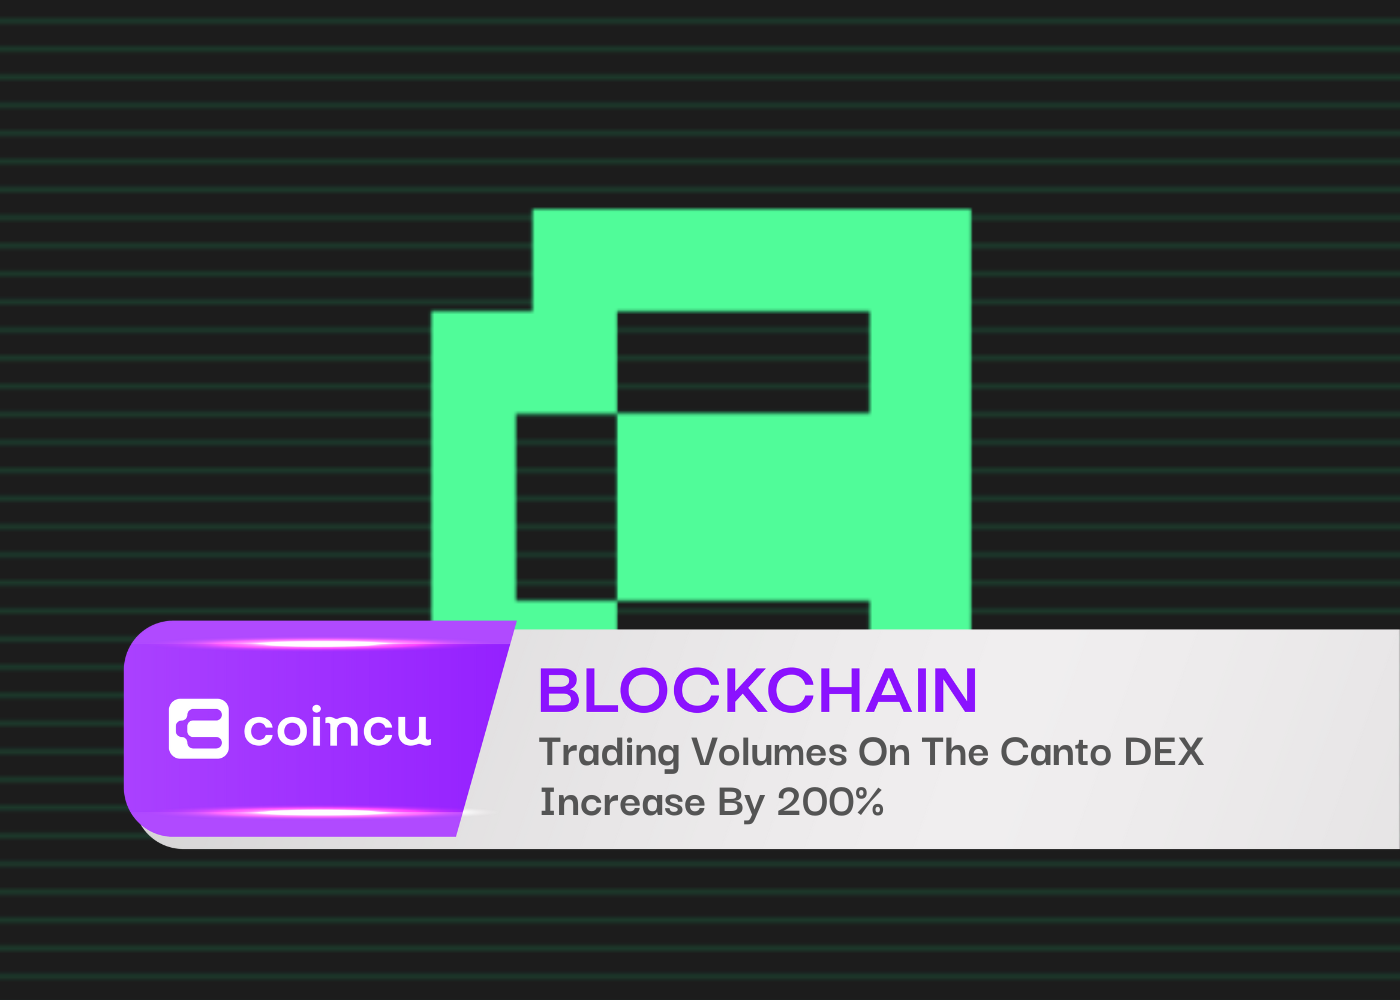 Trading Volumes On The Canto DEX Increase By 200